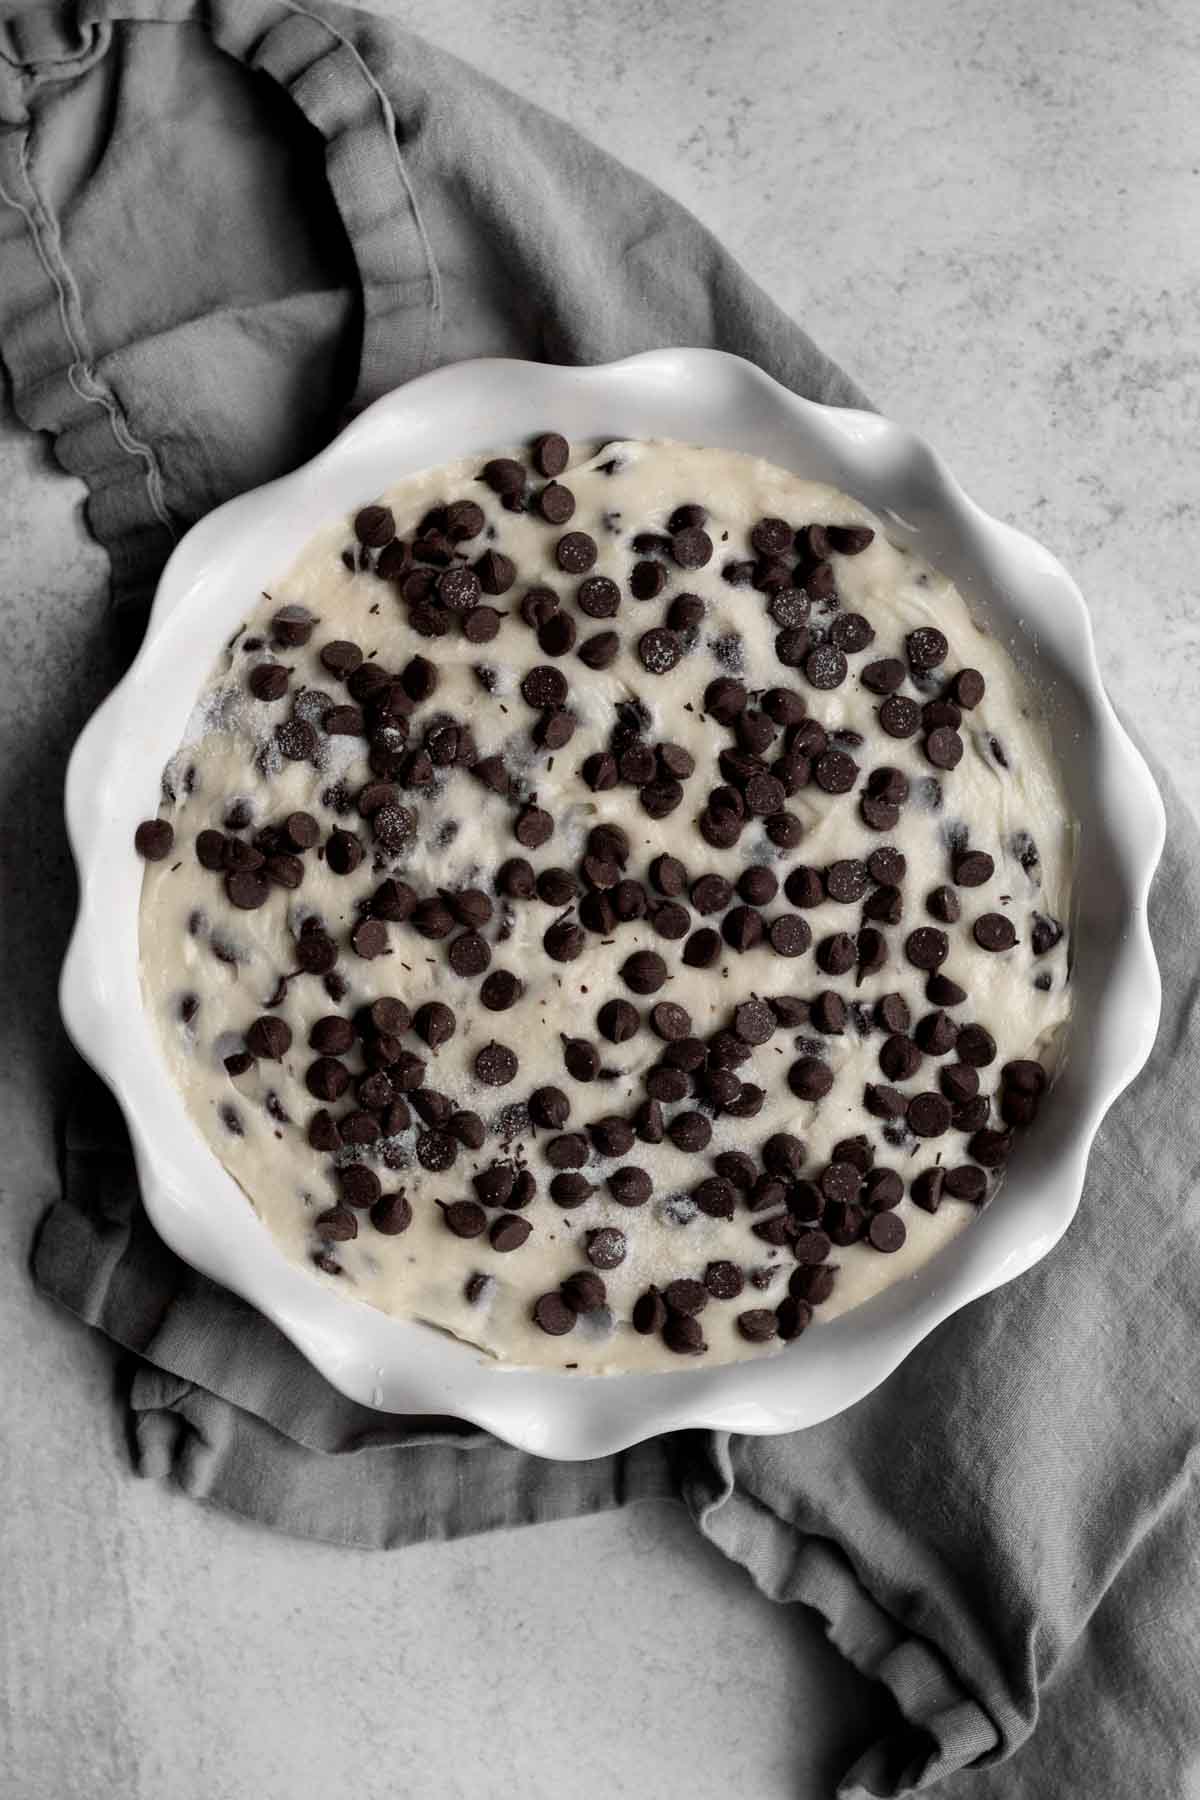 Vanilla batter dotted in chocolate chips.